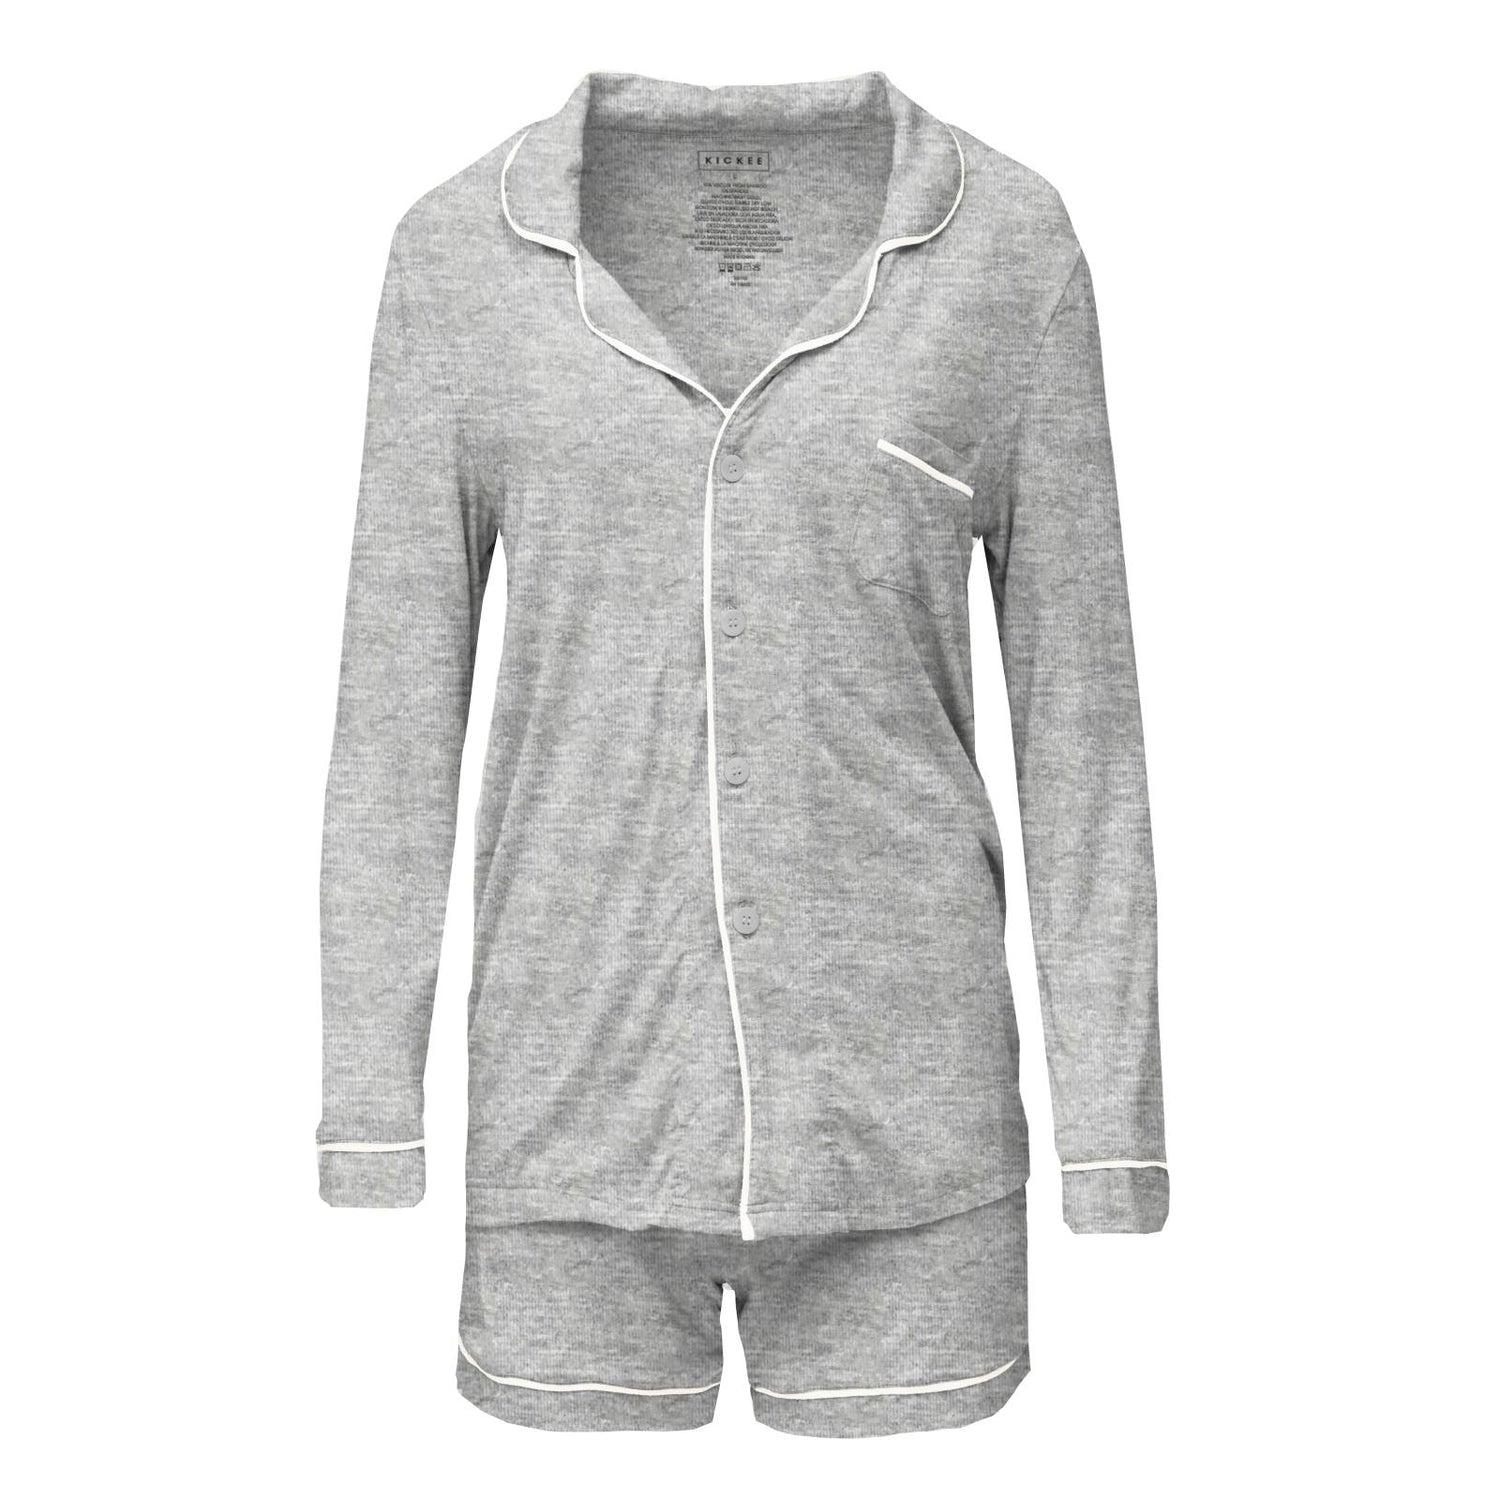 Women's Long Sleeve Collared Pajama Set with Shorts in Heathered Mist with Natural